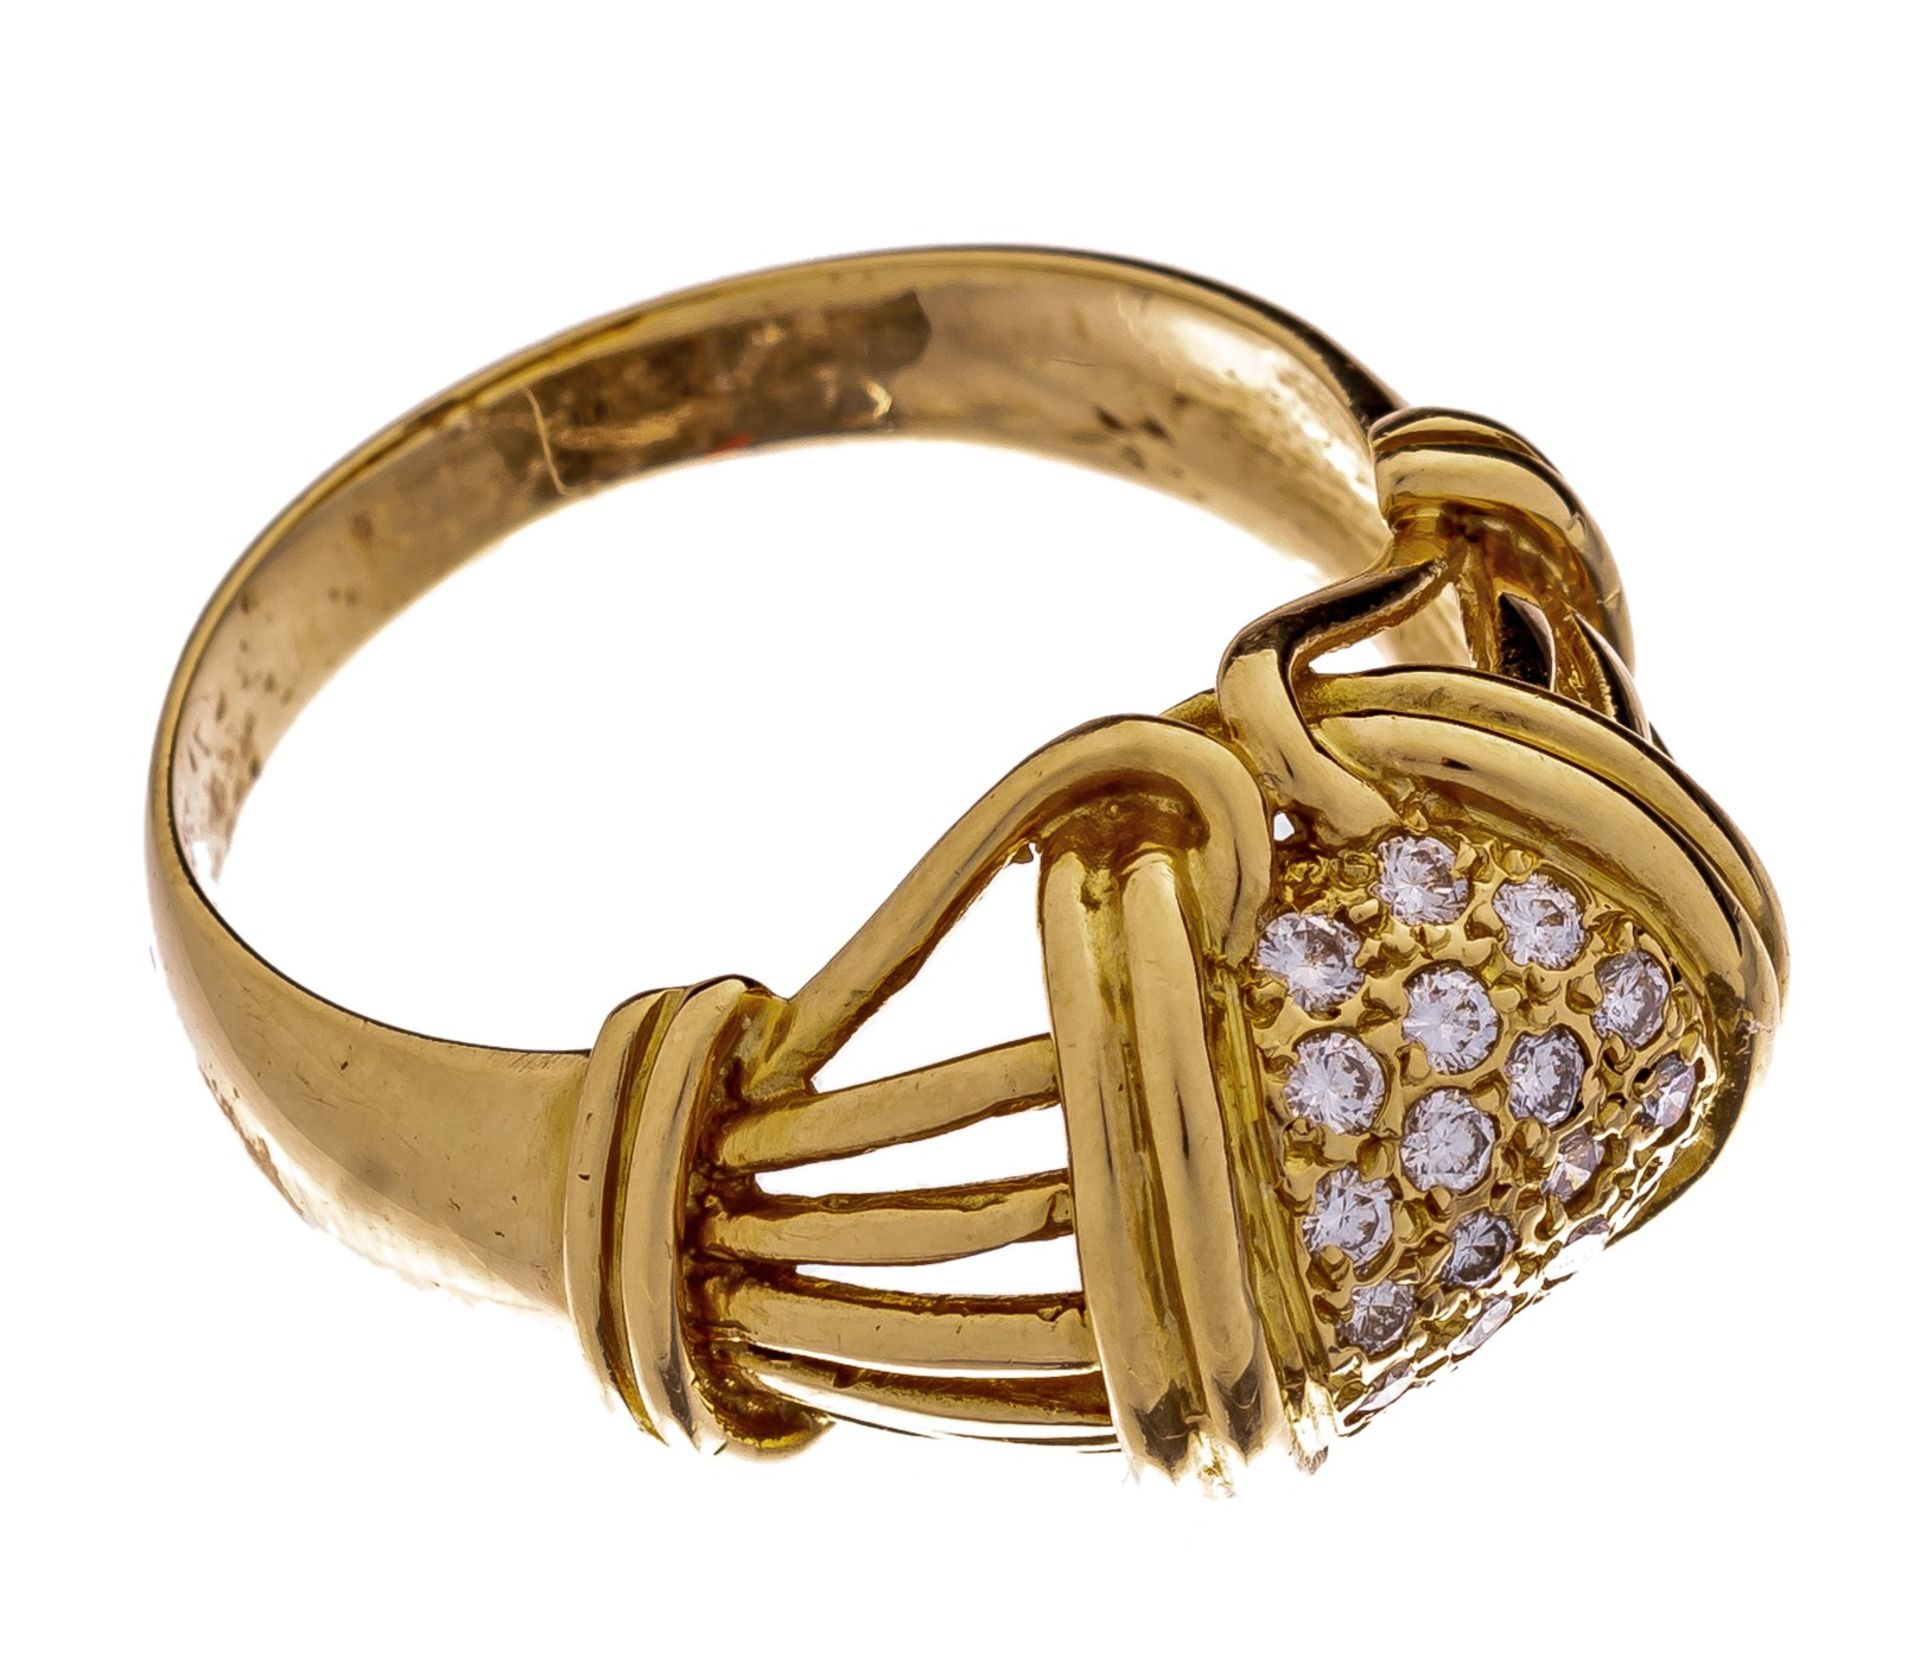 A ring in 18ct gold, set with 19 brilliant cut diamonds, 8,8 g - Image 2 of 3